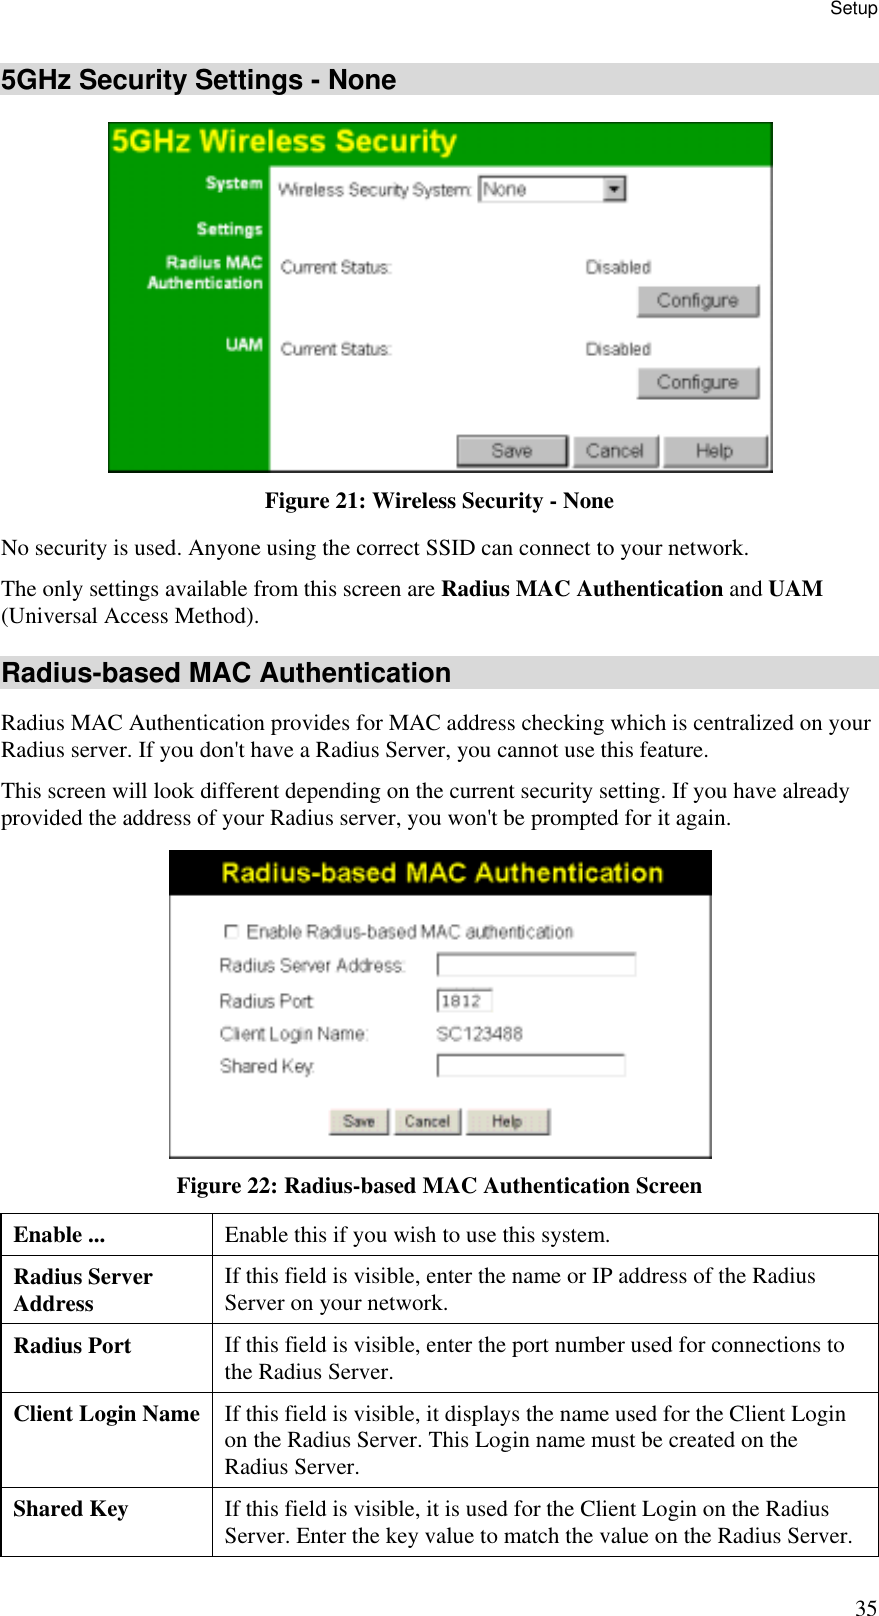 Setup 35 5GHz Security Settings - None  Figure 21: Wireless Security - None No security is used. Anyone using the correct SSID can connect to your network. The only settings available from this screen are Radius MAC Authentication and UAM (Universal Access Method). Radius-based MAC Authentication Radius MAC Authentication provides for MAC address checking which is centralized on your Radius server. If you don&apos;t have a Radius Server, you cannot use this feature.  This screen will look different depending on the current security setting. If you have already provided the address of your Radius server, you won&apos;t be prompted for it again.  Figure 22: Radius-based MAC Authentication Screen Enable ...  Enable this if you wish to use this system. Radius Server Address  If this field is visible, enter the name or IP address of the Radius Server on your network. Radius Port  If this field is visible, enter the port number used for connections to the Radius Server. Client Login Name  If this field is visible, it displays the name used for the Client Login on the Radius Server. This Login name must be created on the Radius Server. Shared Key  If this field is visible, it is used for the Client Login on the Radius Server. Enter the key value to match the value on the Radius Server. 